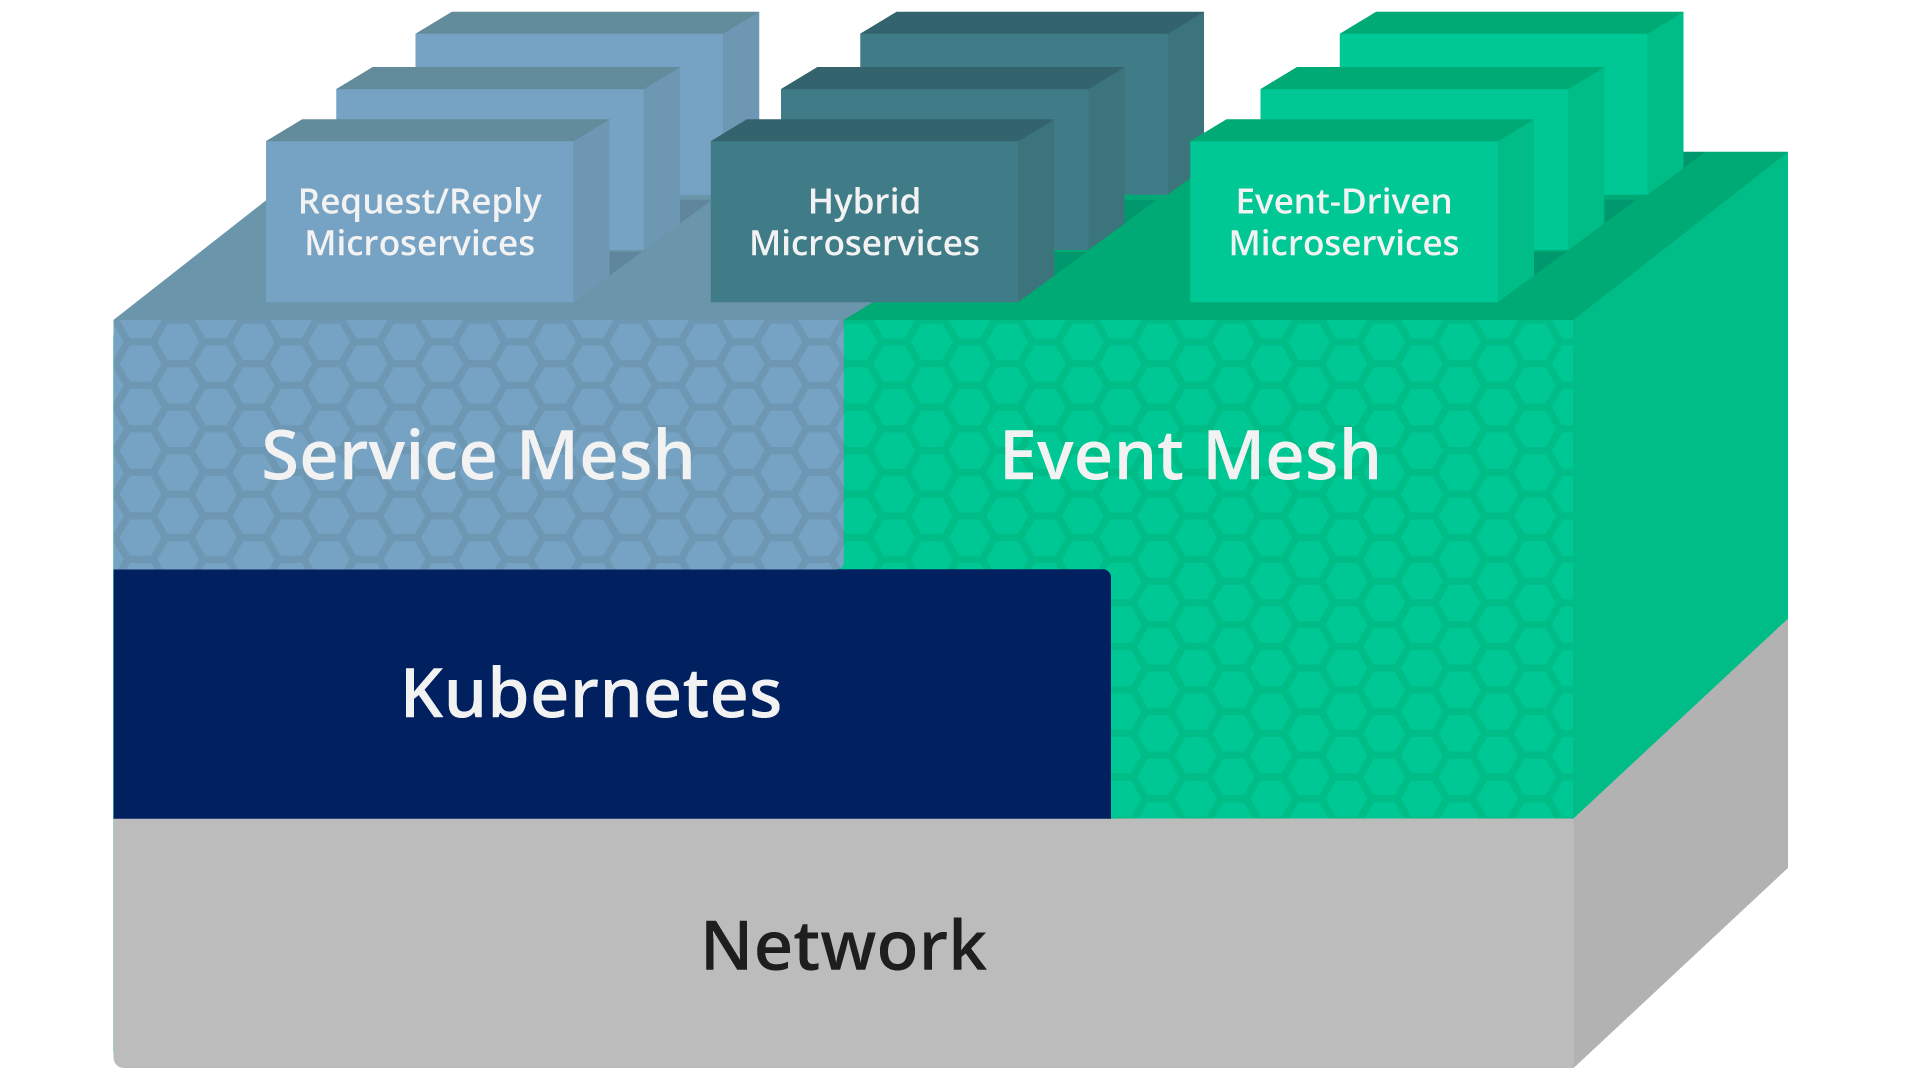 A diagram that shows where an event mesh fits in an application stack relative to other technologies such as service mesh.